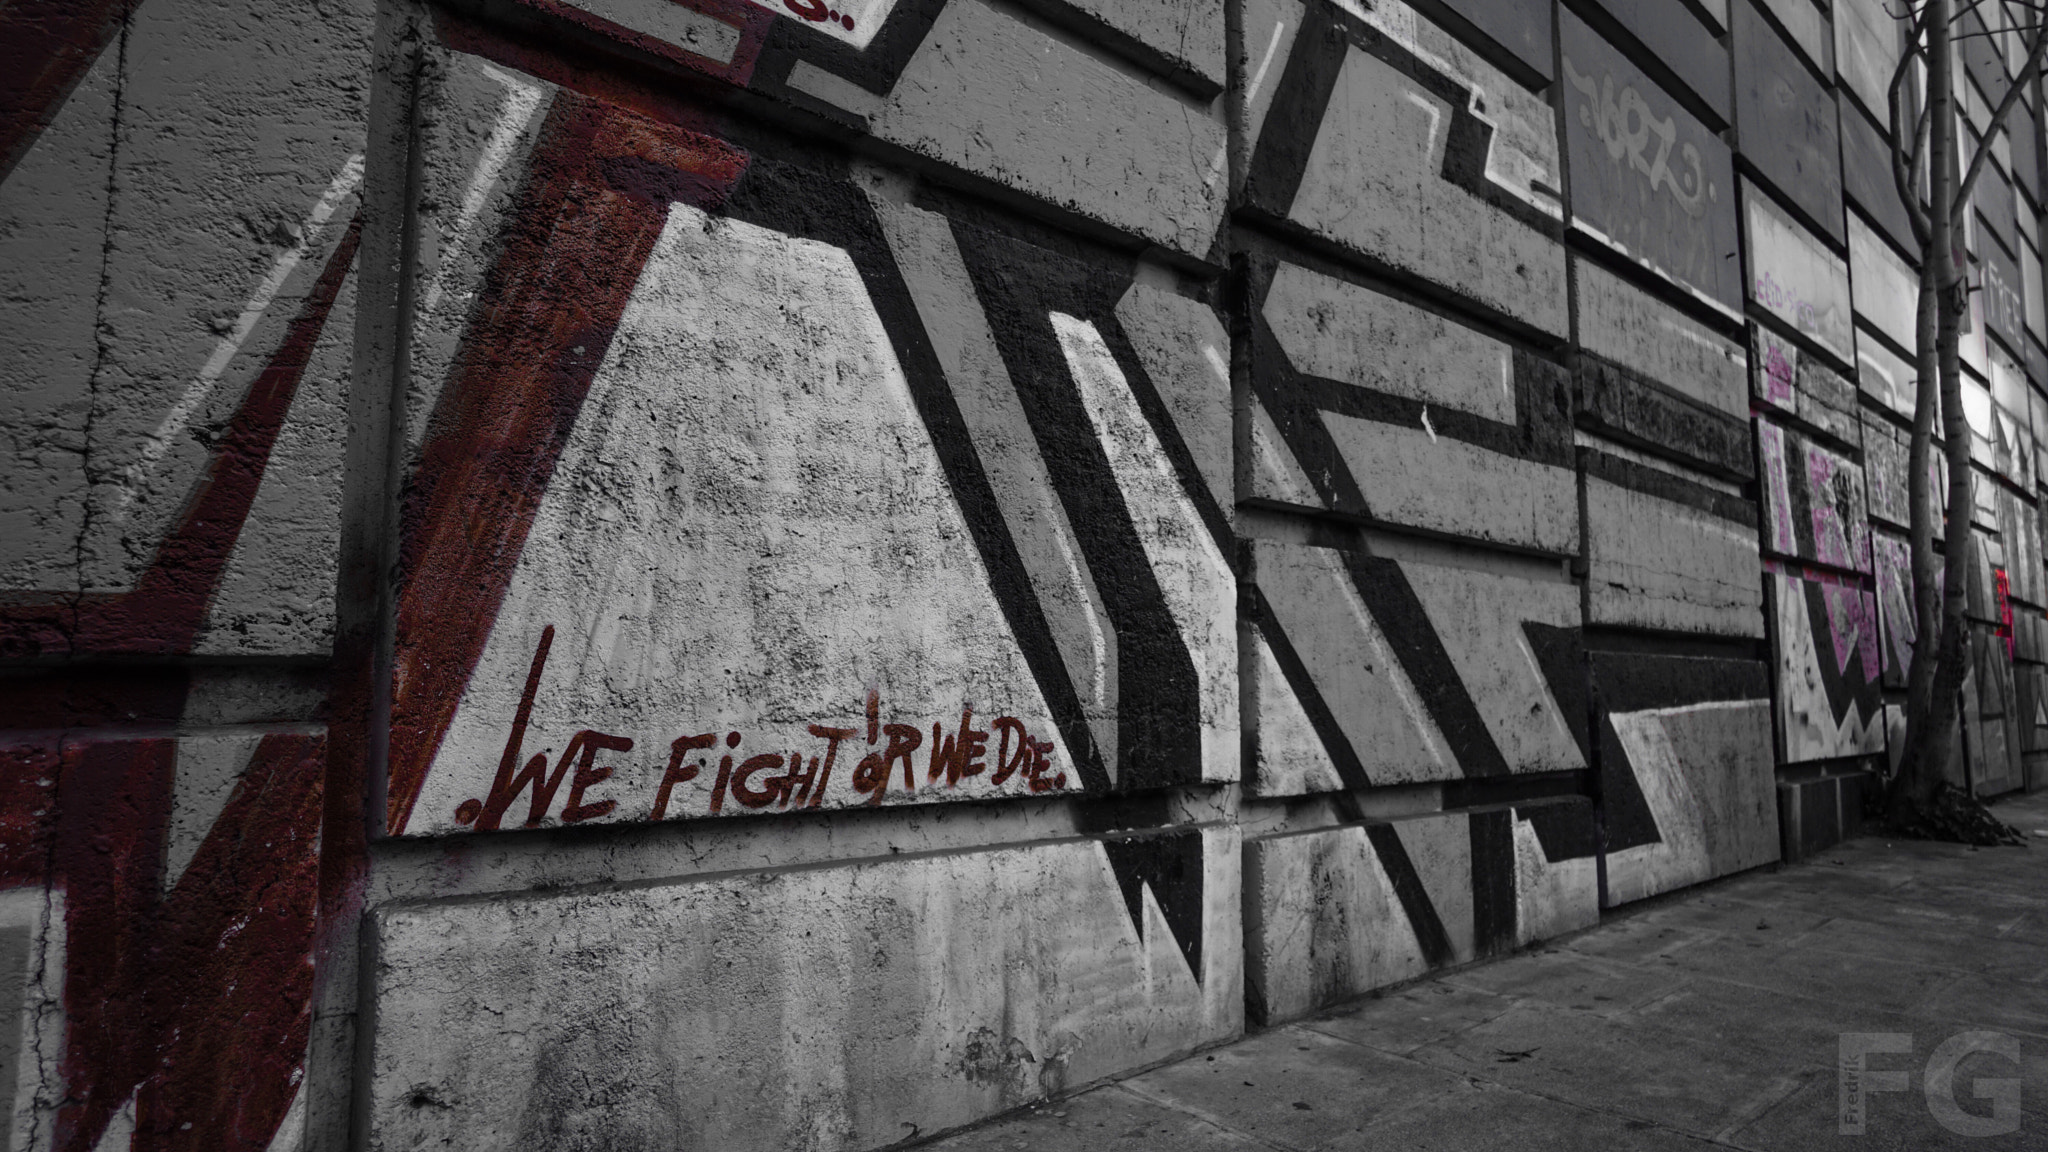 Sony a6000 sample photo. We fight or we die photography